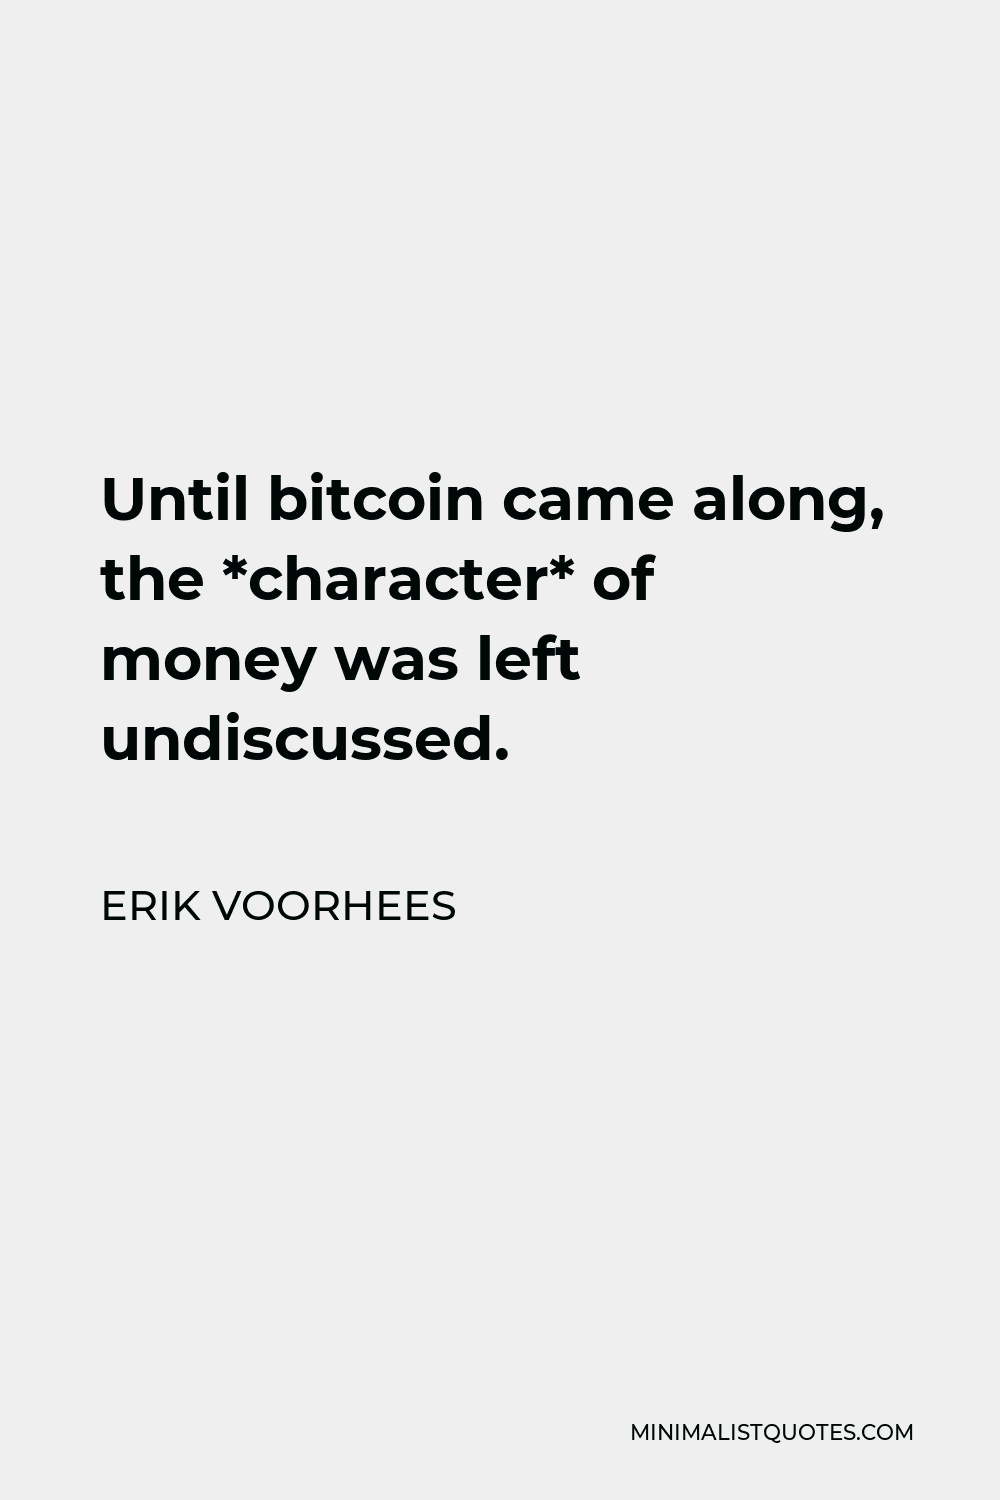 Erik Voorhees Quote - Until bitcoin came along, the *character* of money was left undiscussed.